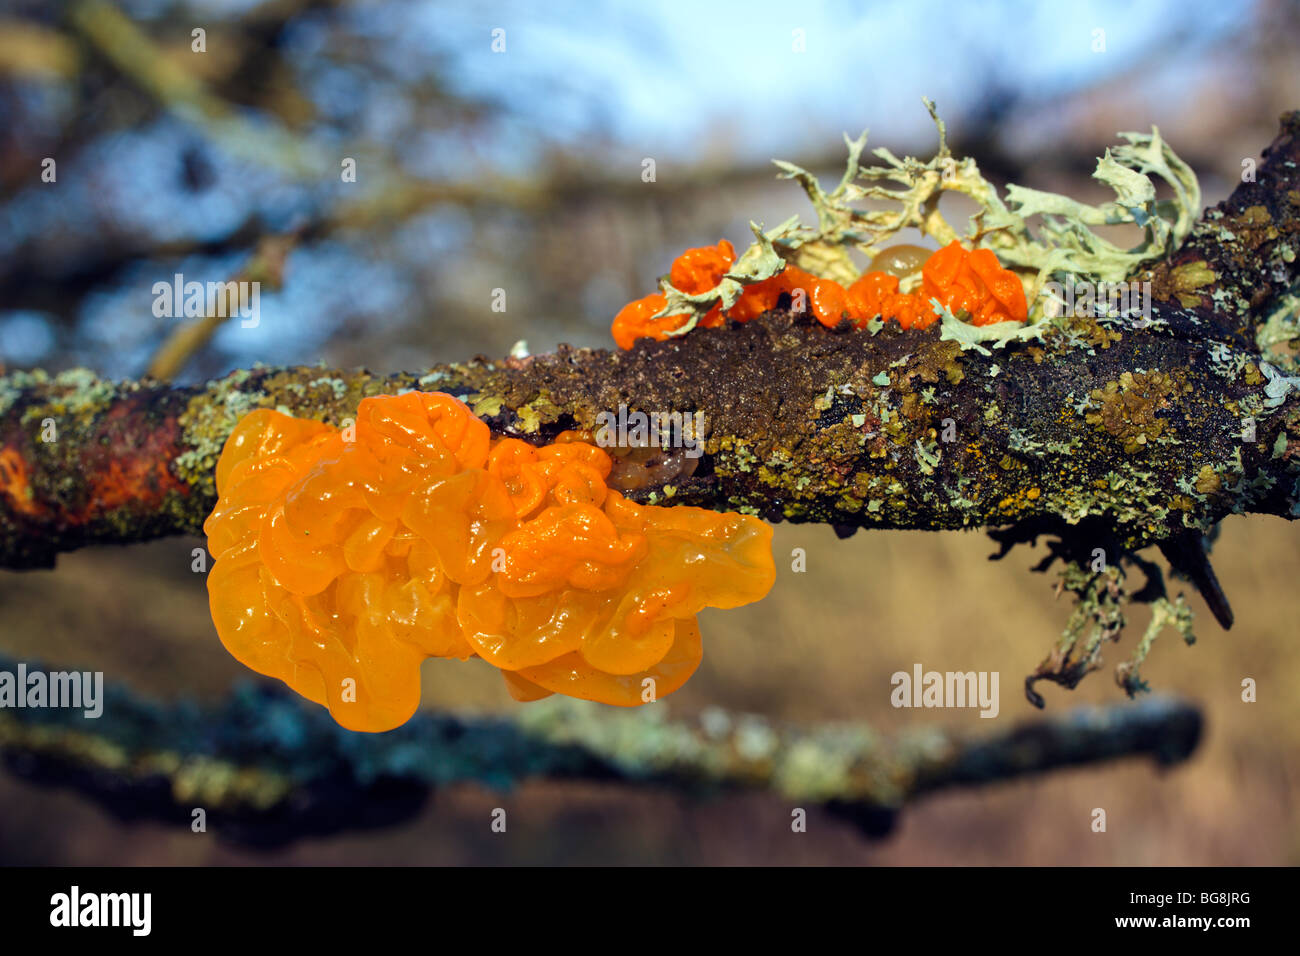 Orange Jelly fungus on a mossy branch Oxfordshire England UK Stock Photo